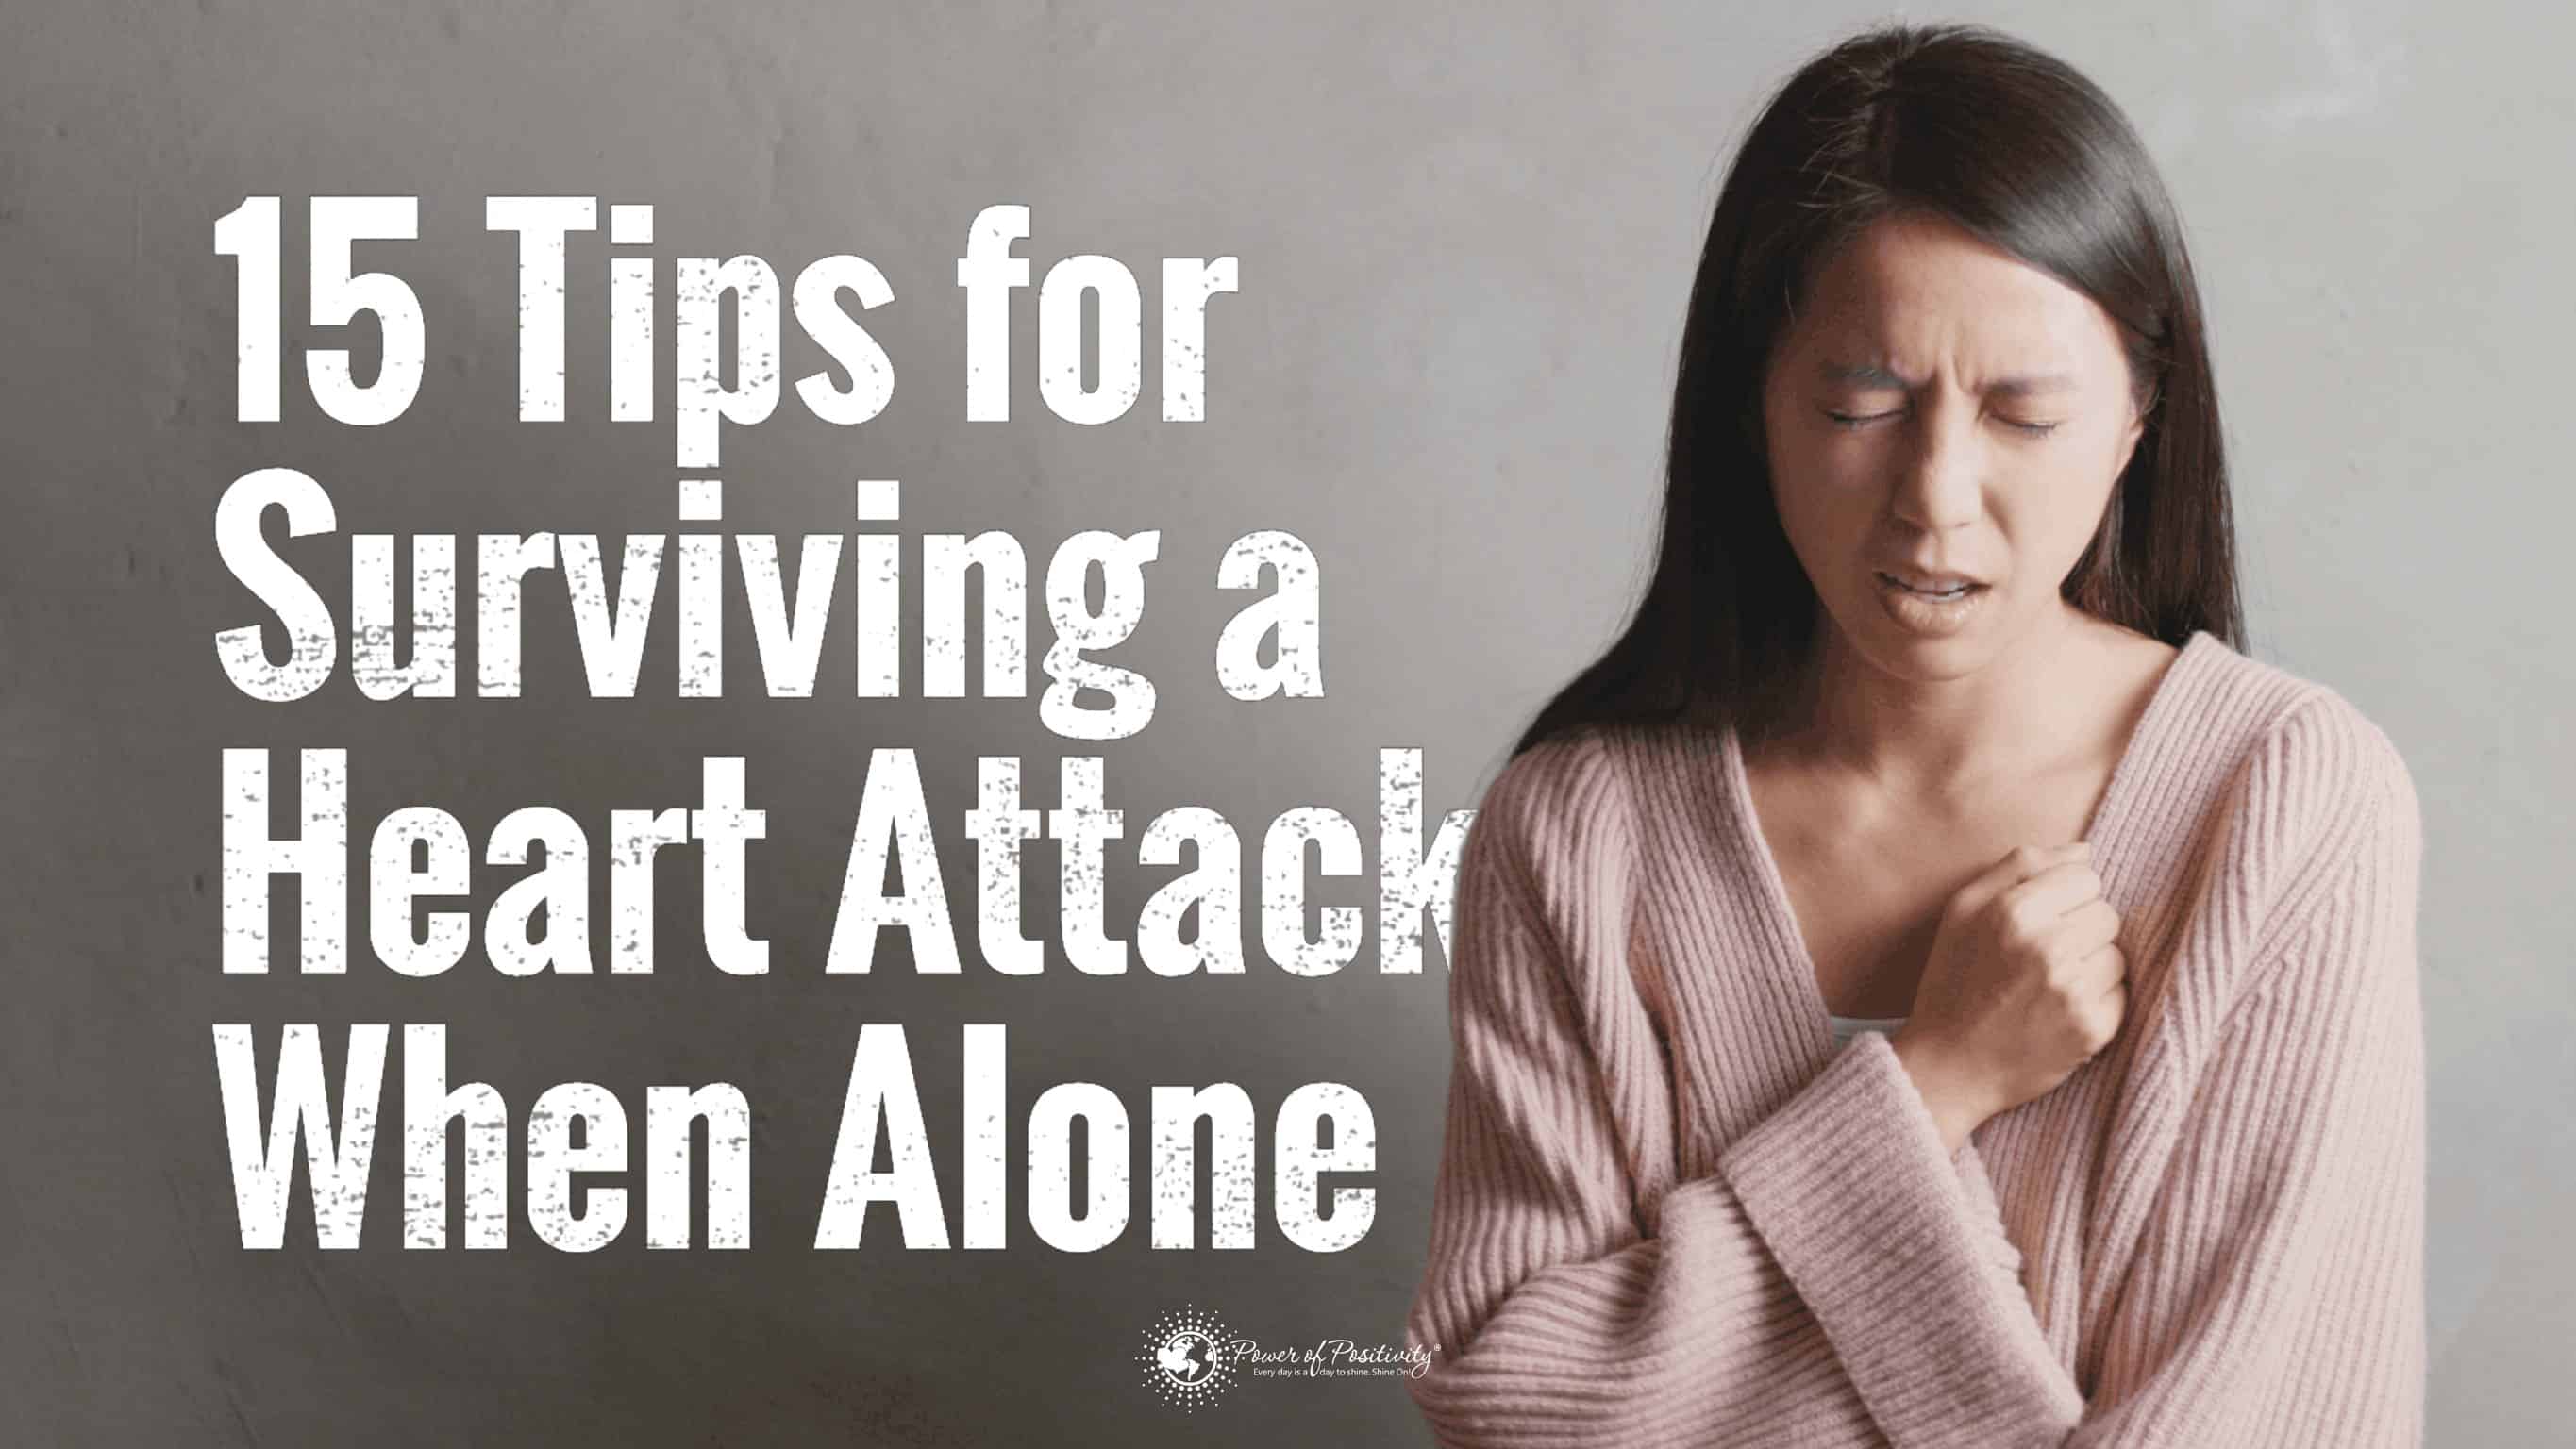 15 Tips for Surviving a Heart Attack When Alone